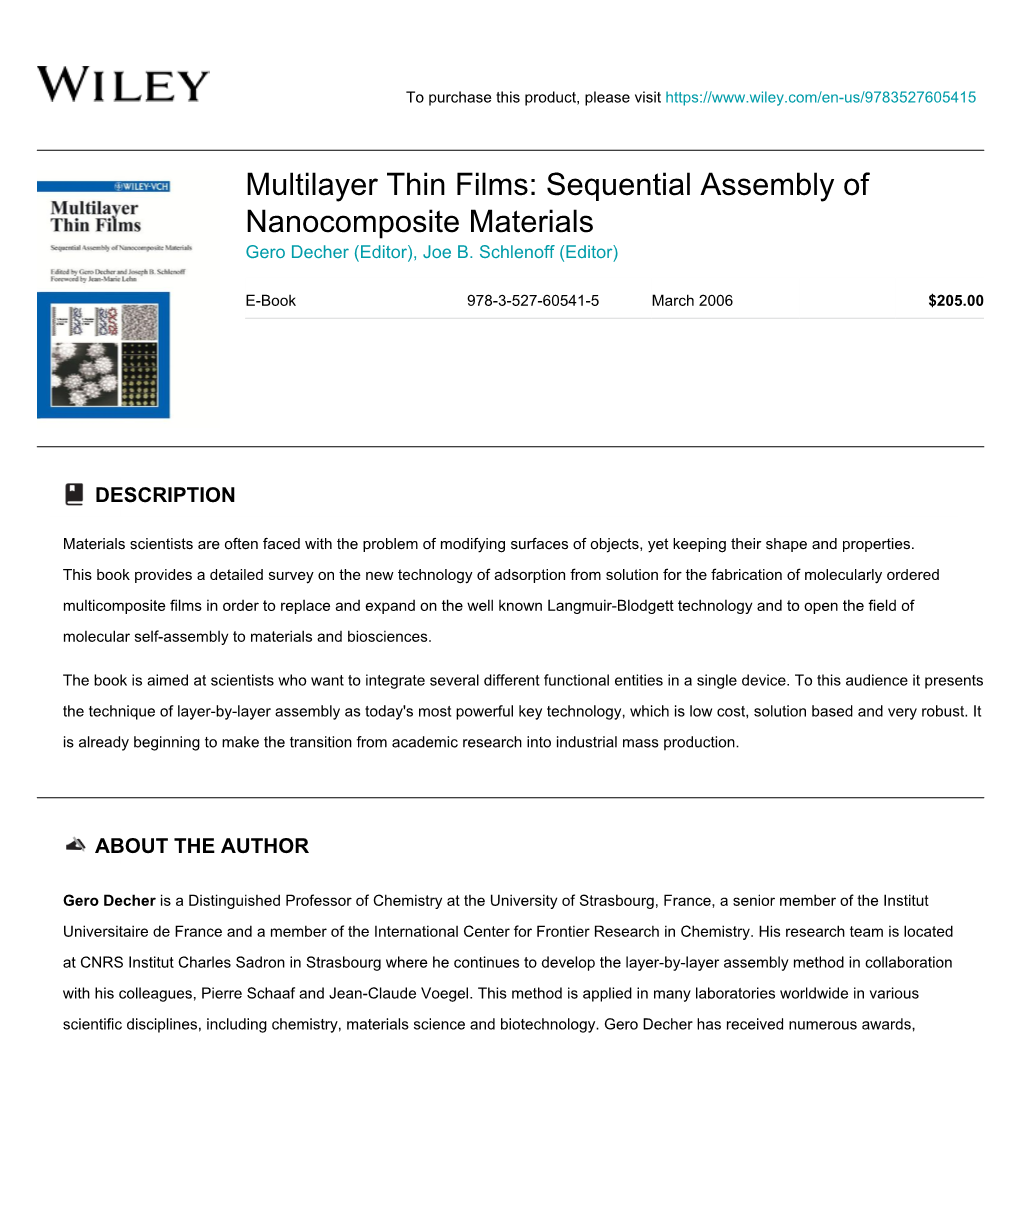 Multilayer Thin Films: Sequential Assembly of Nanocomposite Materials Gero Decher (Editor), Joe B